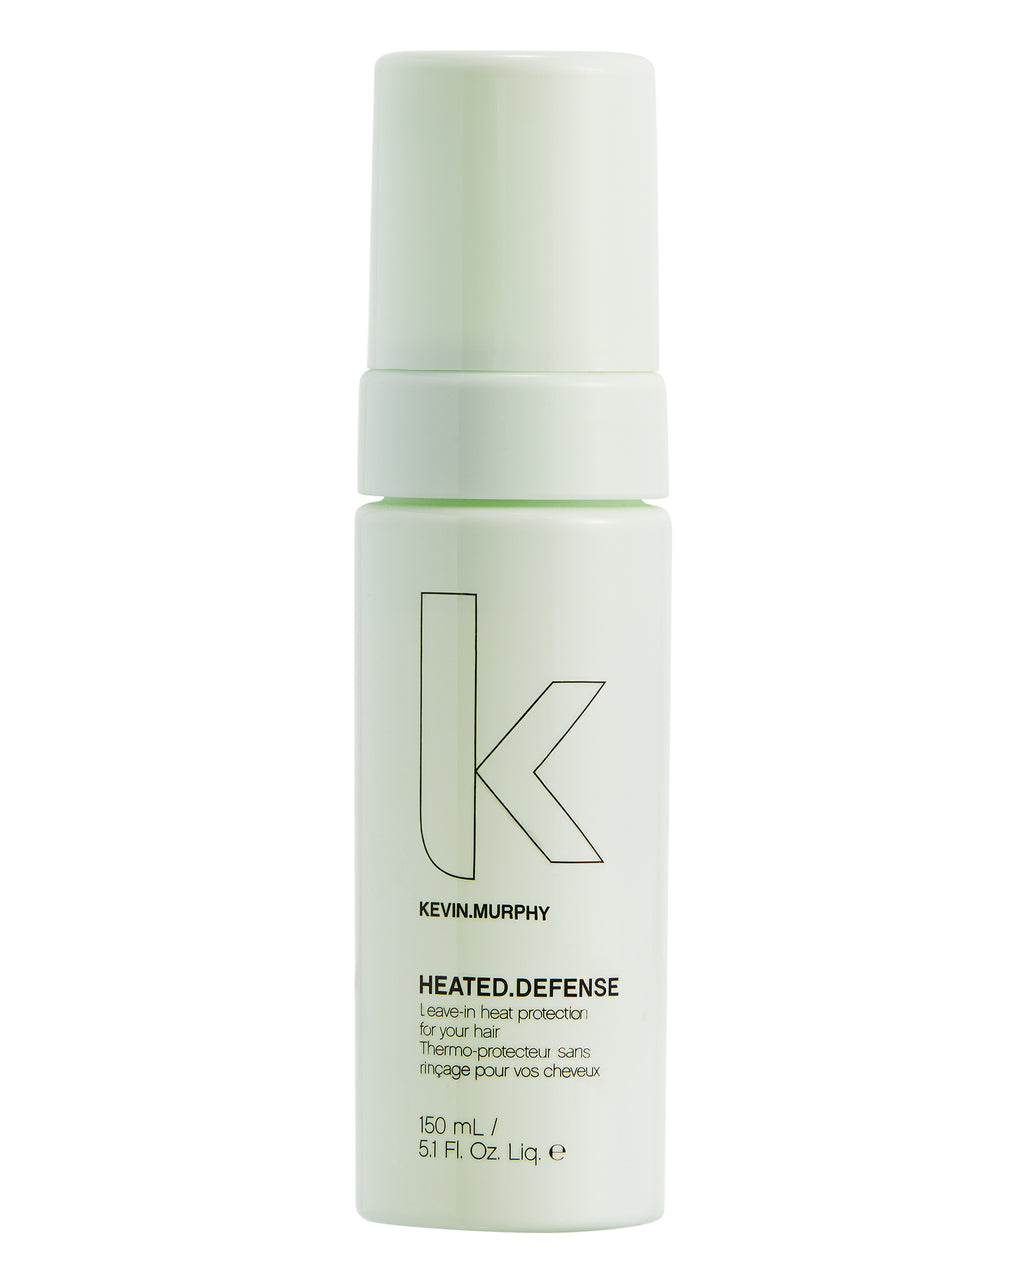 Kevin Murphy Heated Defense leave-in foam creates a protective barrier against heated styling tools 150ml